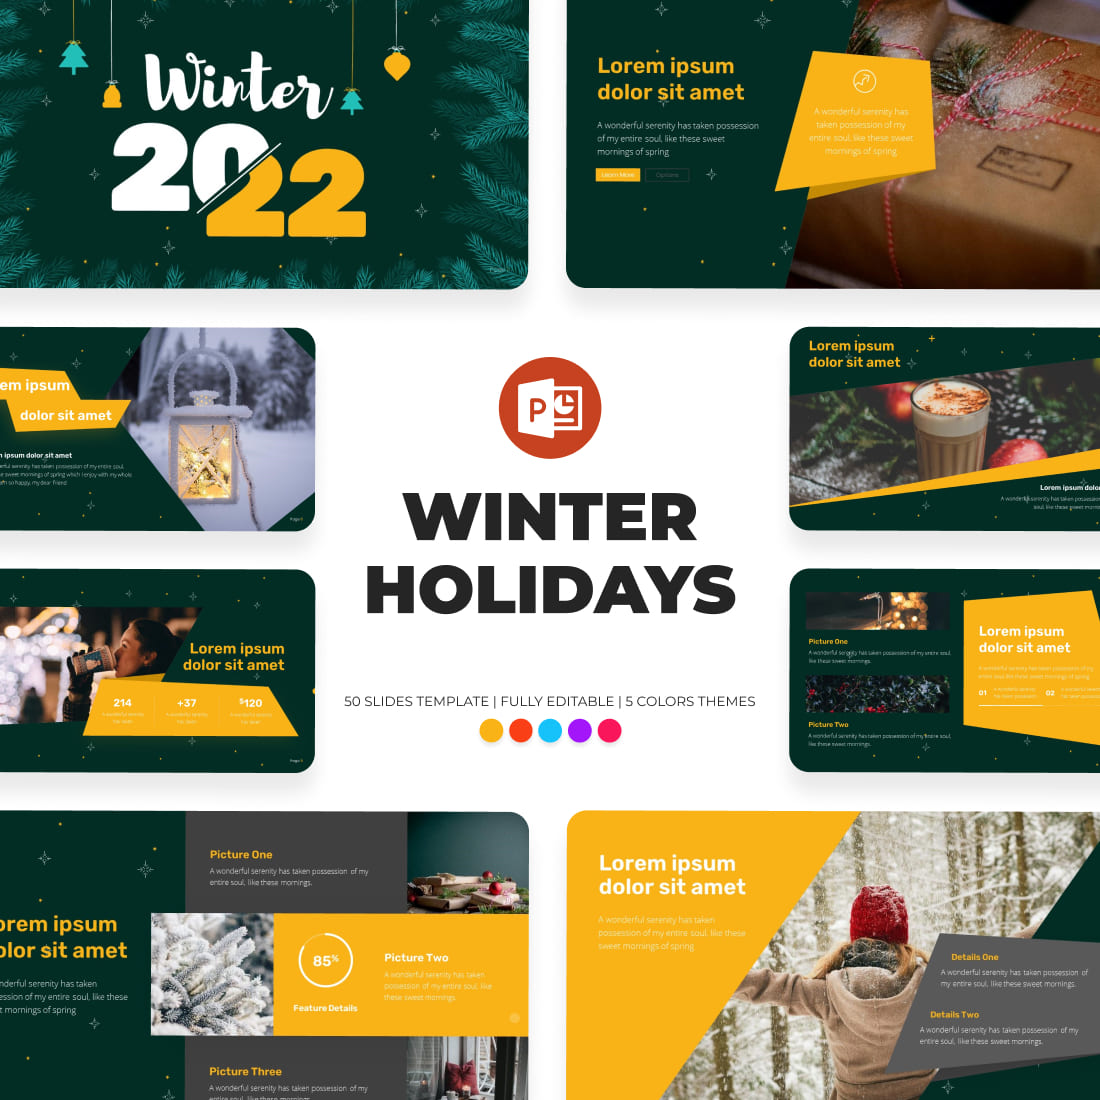 Winter Holidays Powerpoint Template.